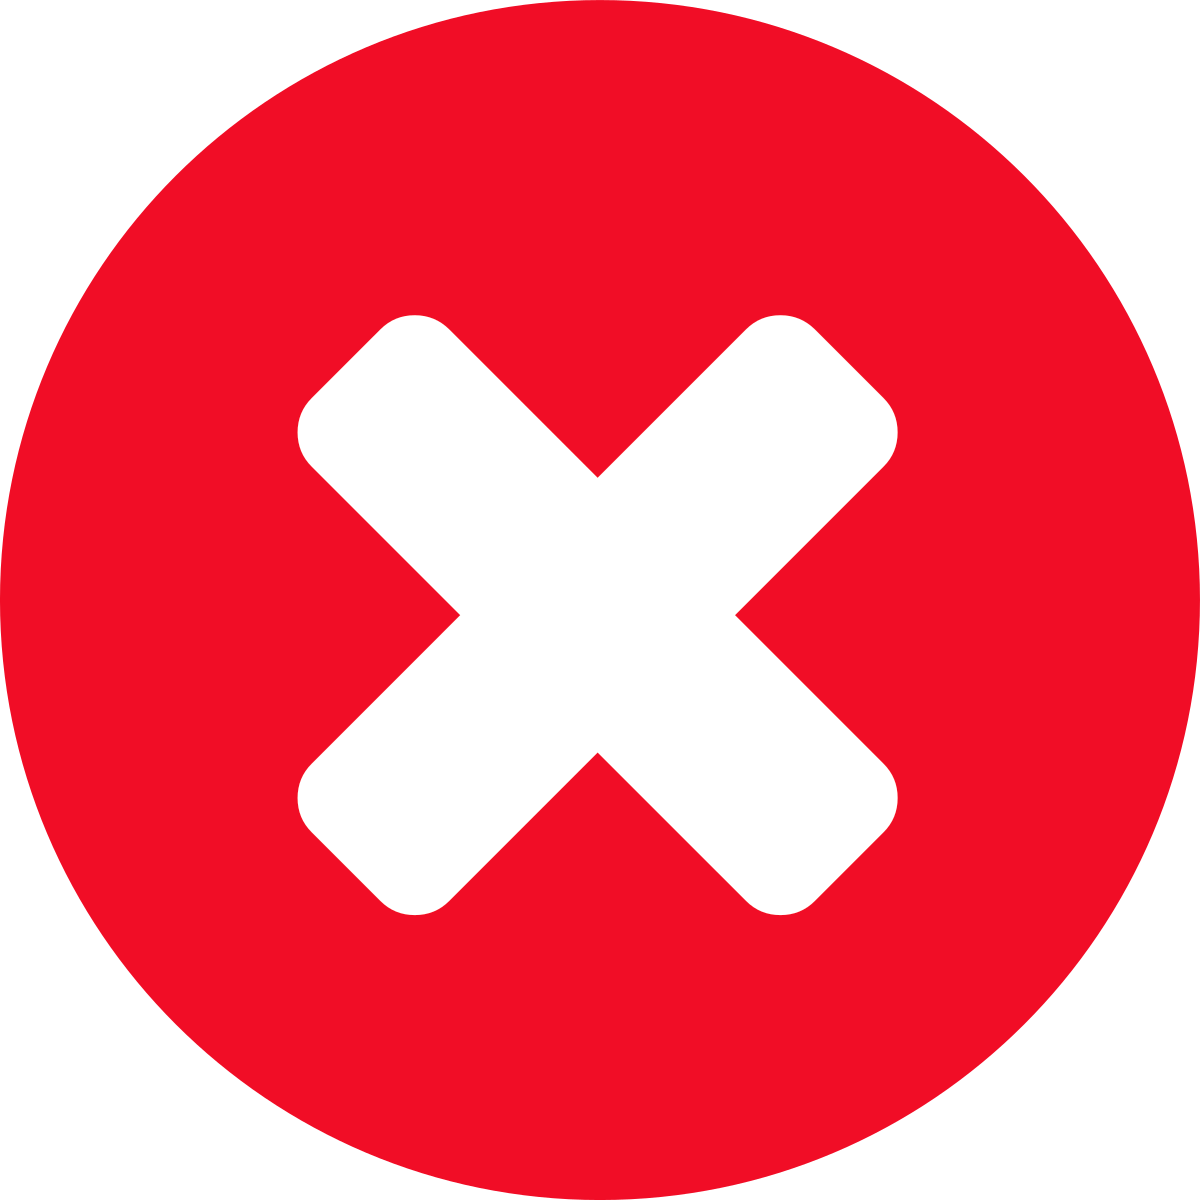 Red Cross Icon